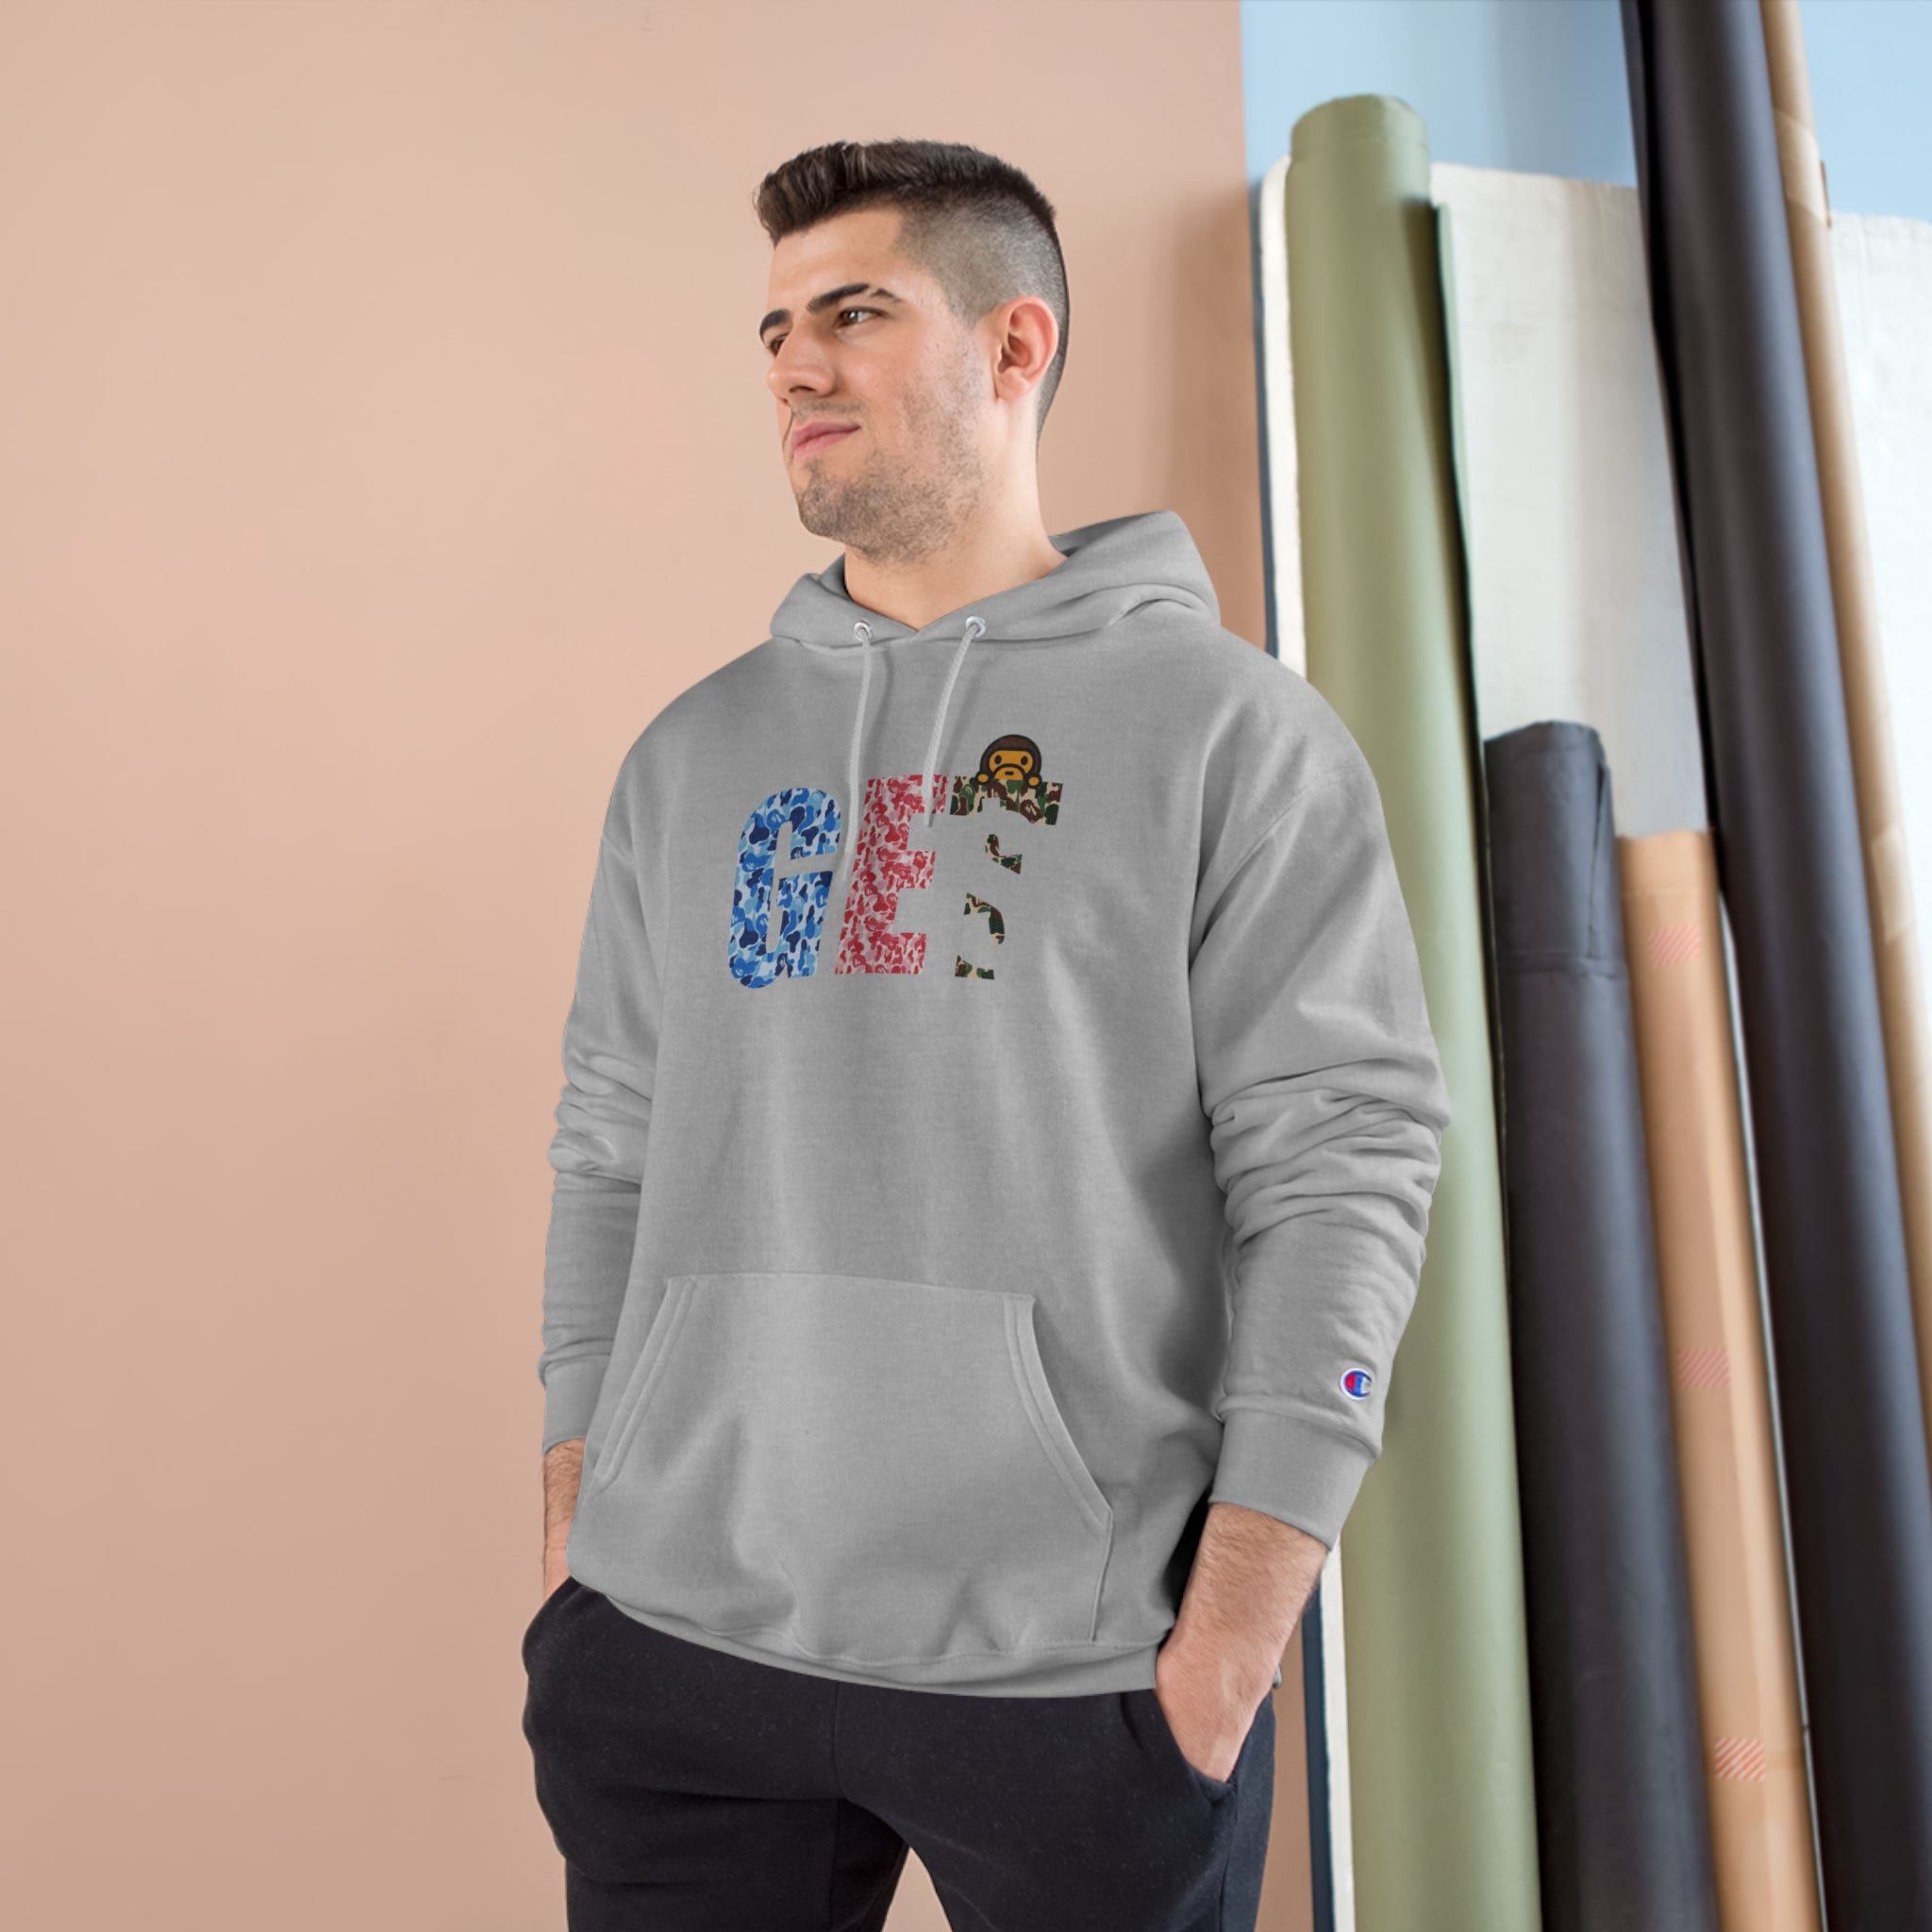 GET$ Collab Champion Hoodie